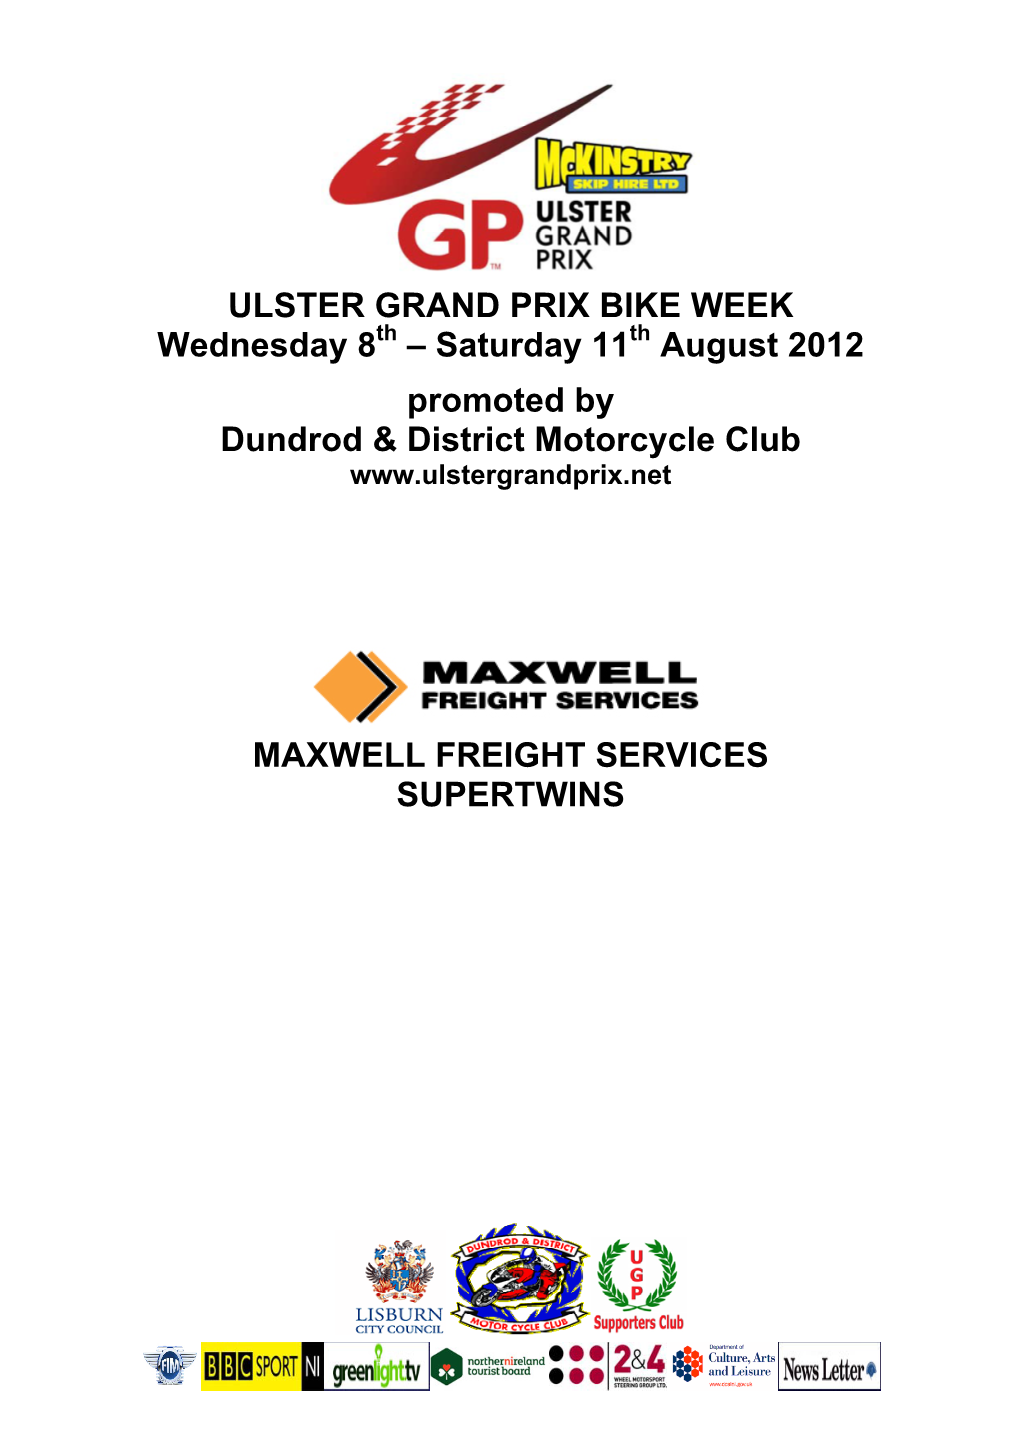 August 2012 Promoted by Dundrod & District Motorcycle Club